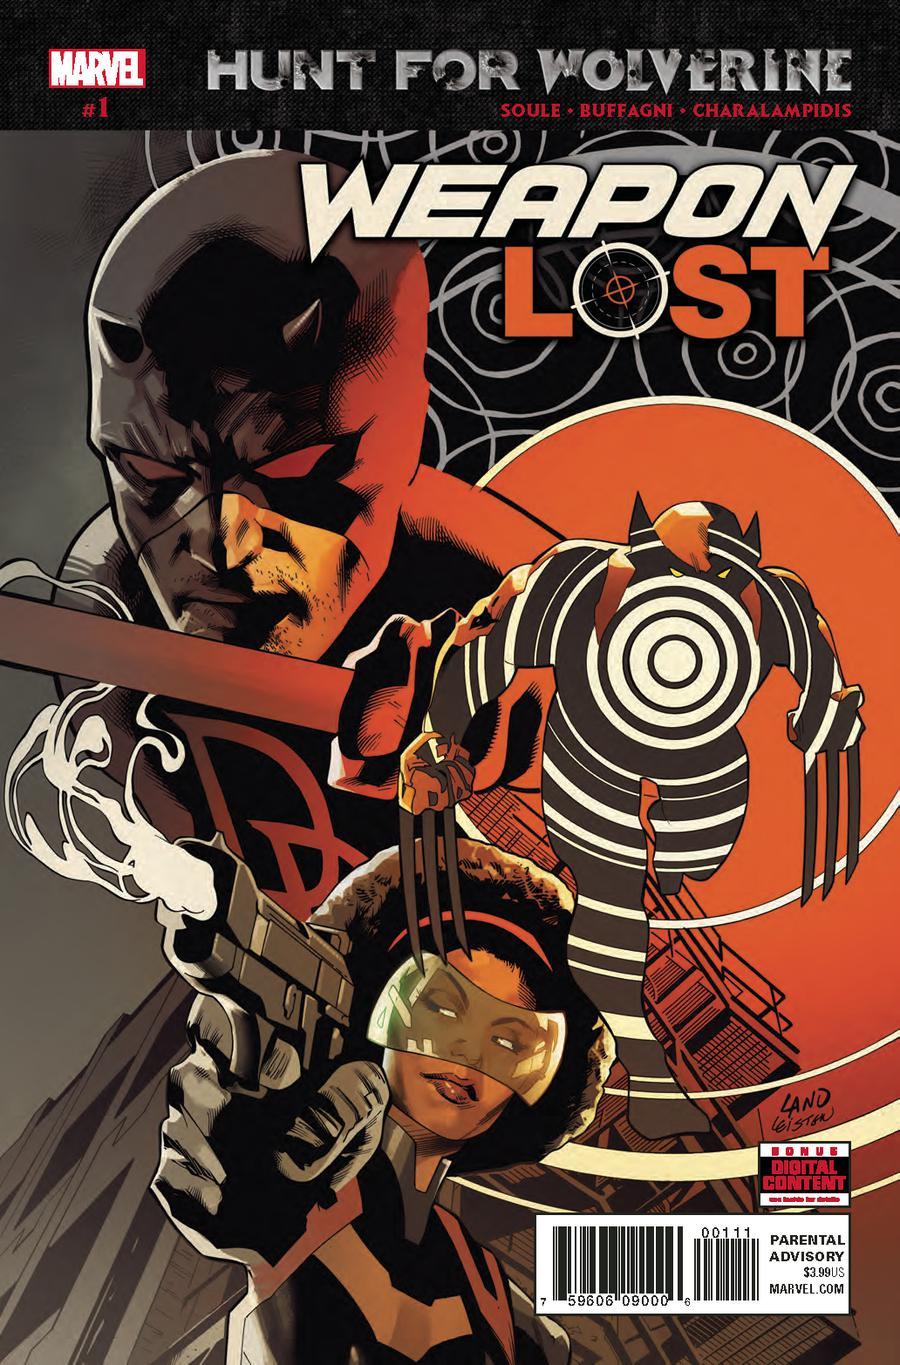 Hunt For Wolverine Weapon Lost Vol. 1 #1